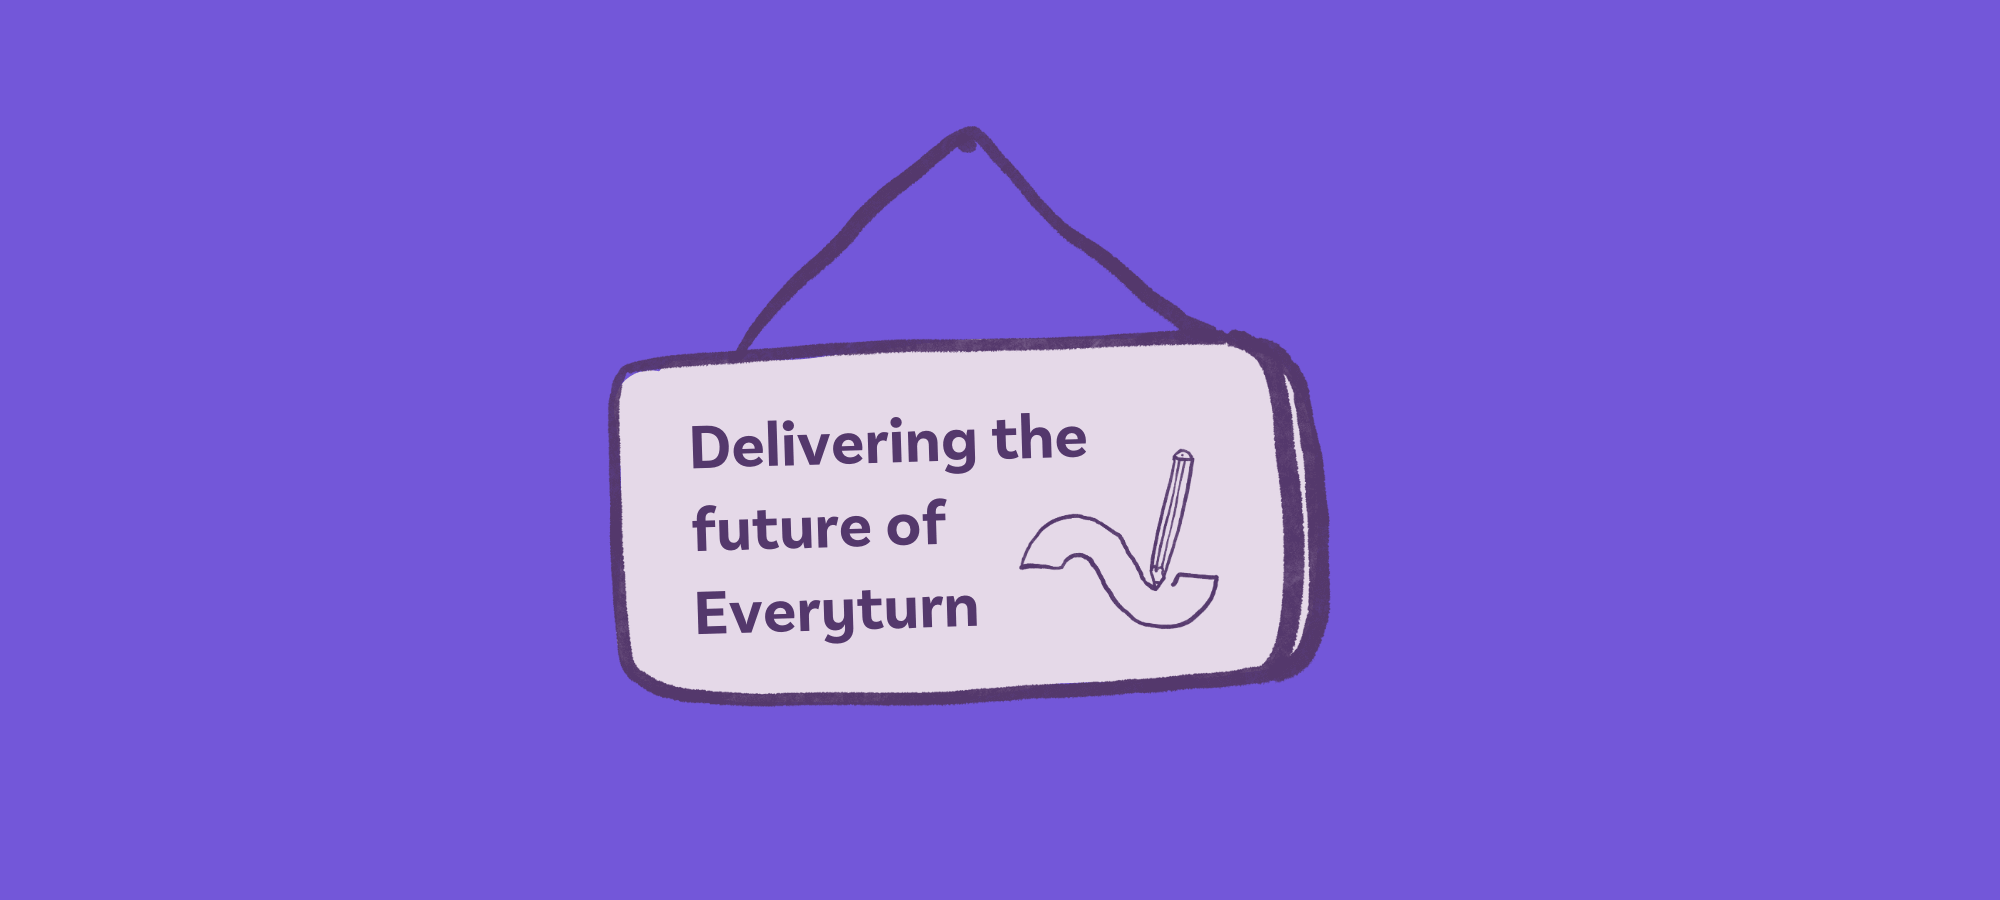 Delivering the future of Everyturn